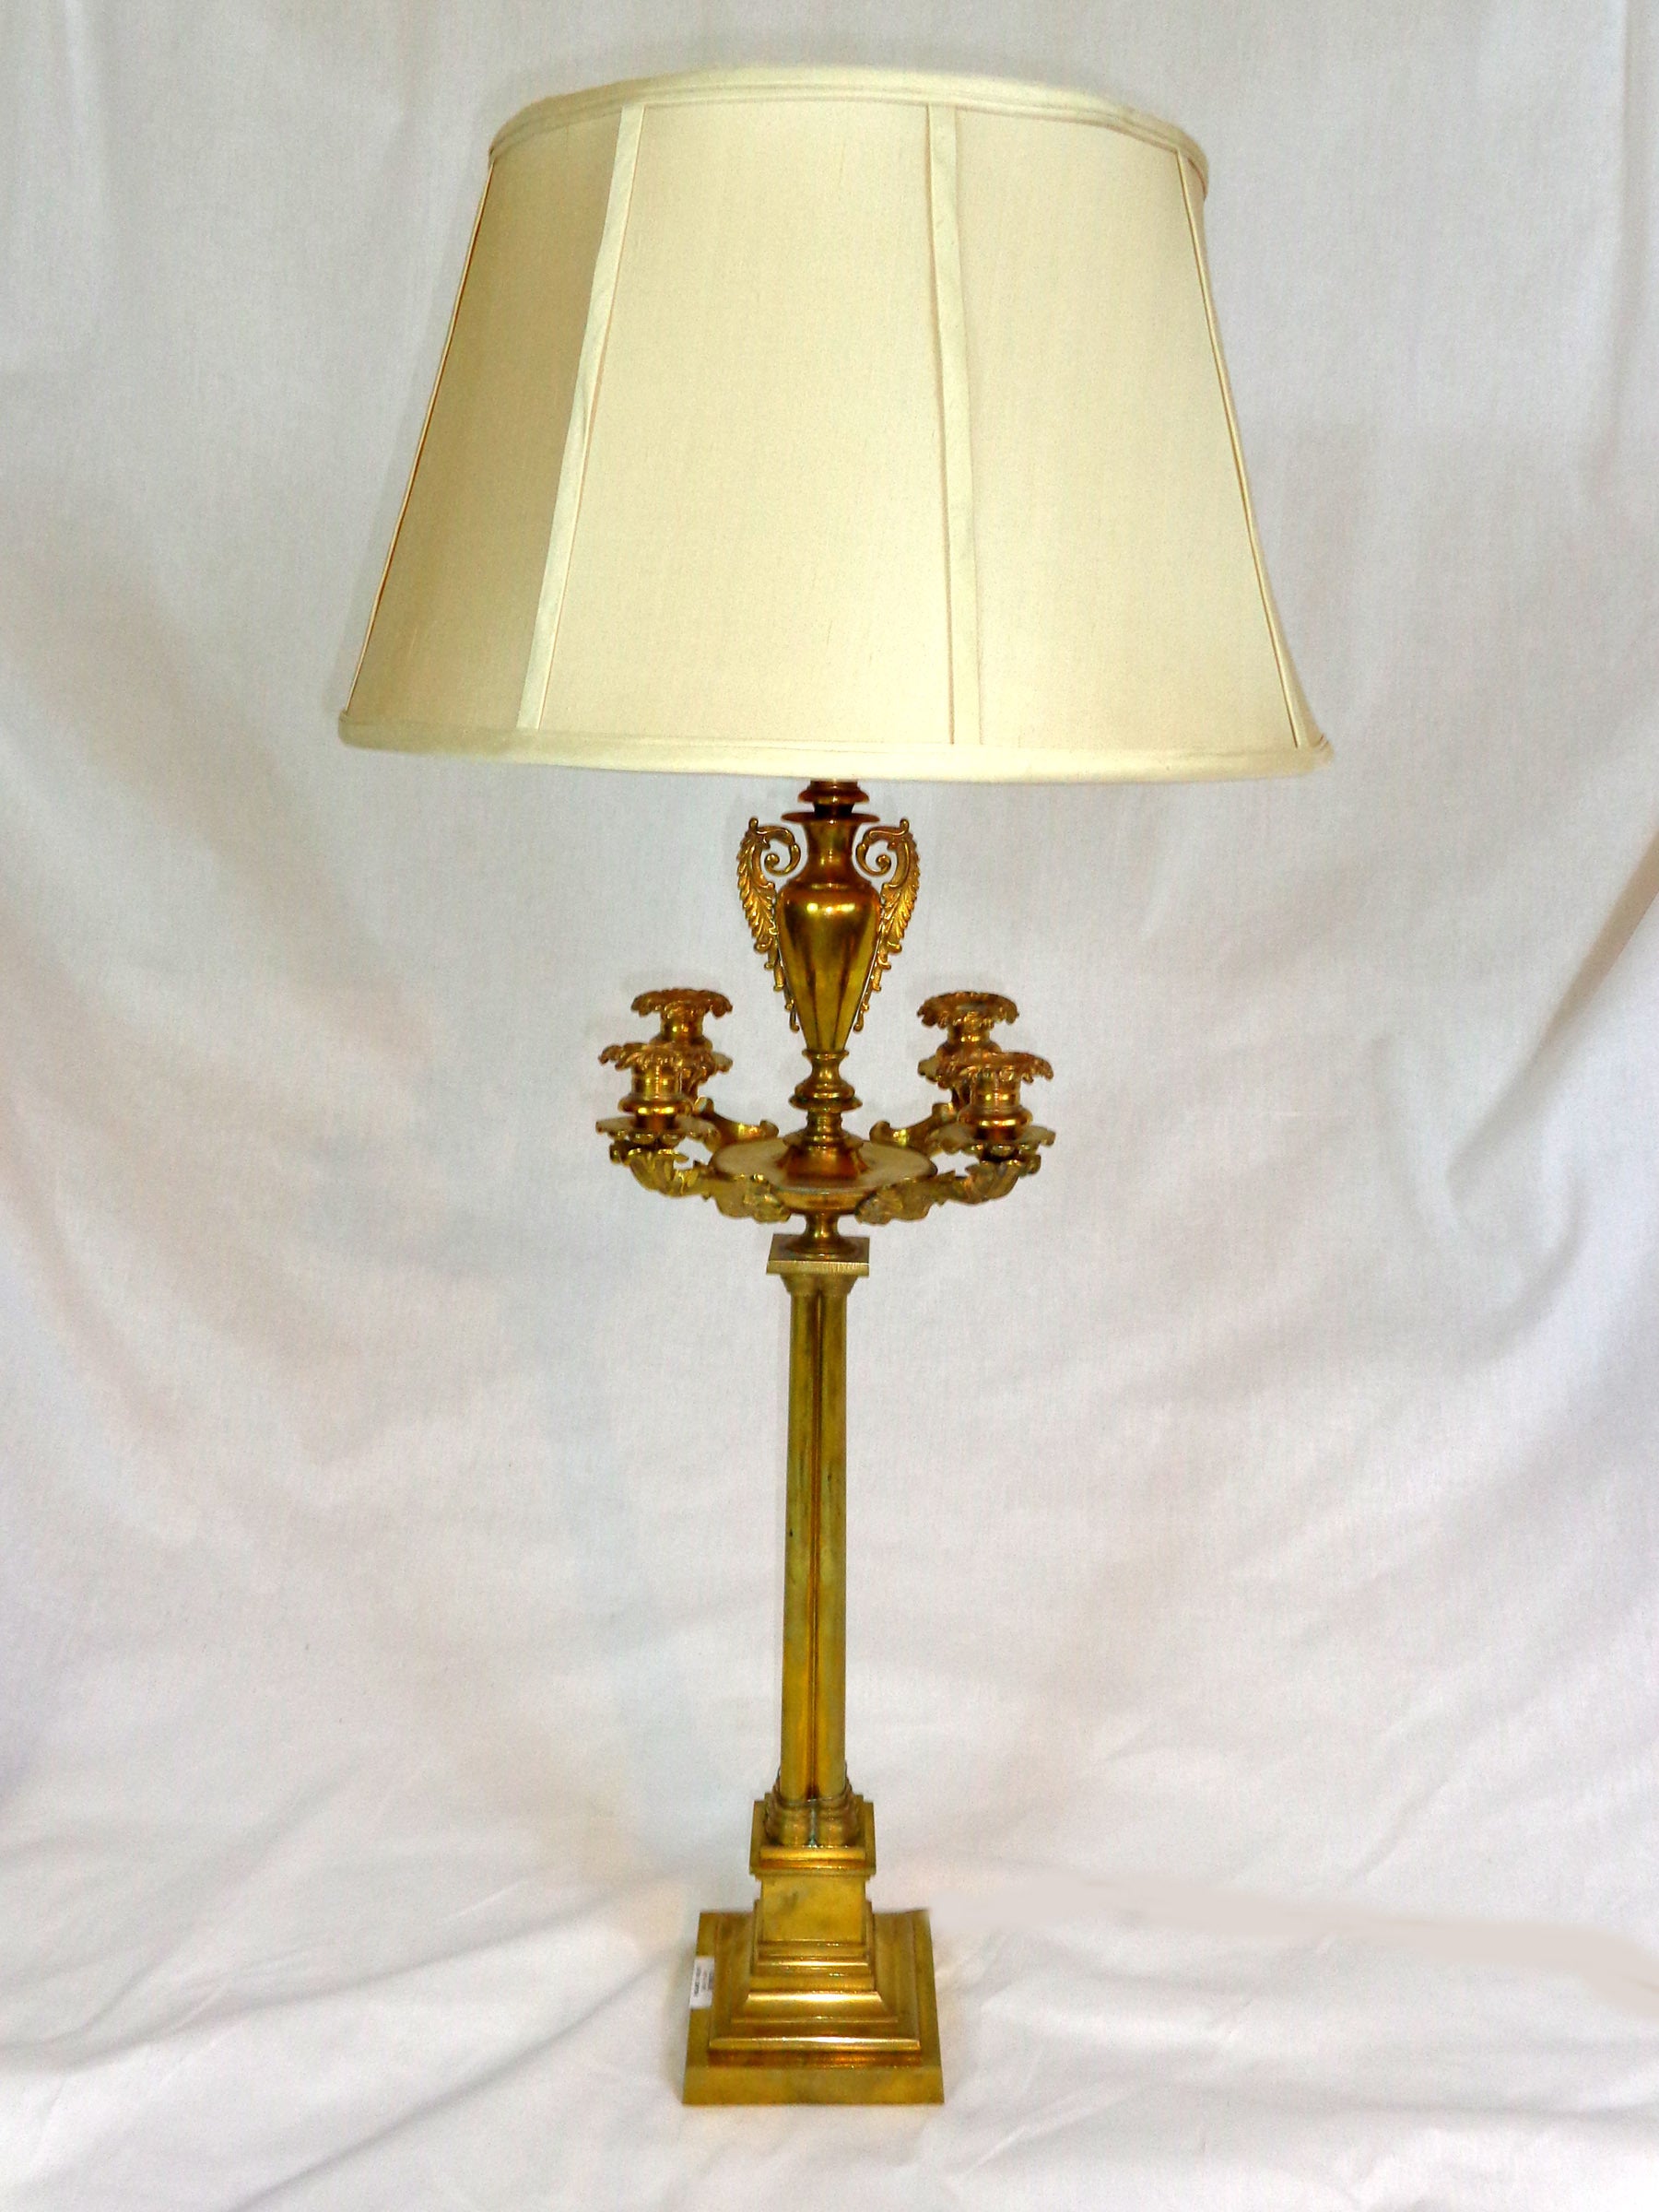 Early 20th Century Brass Candelabra Lamp For Sale